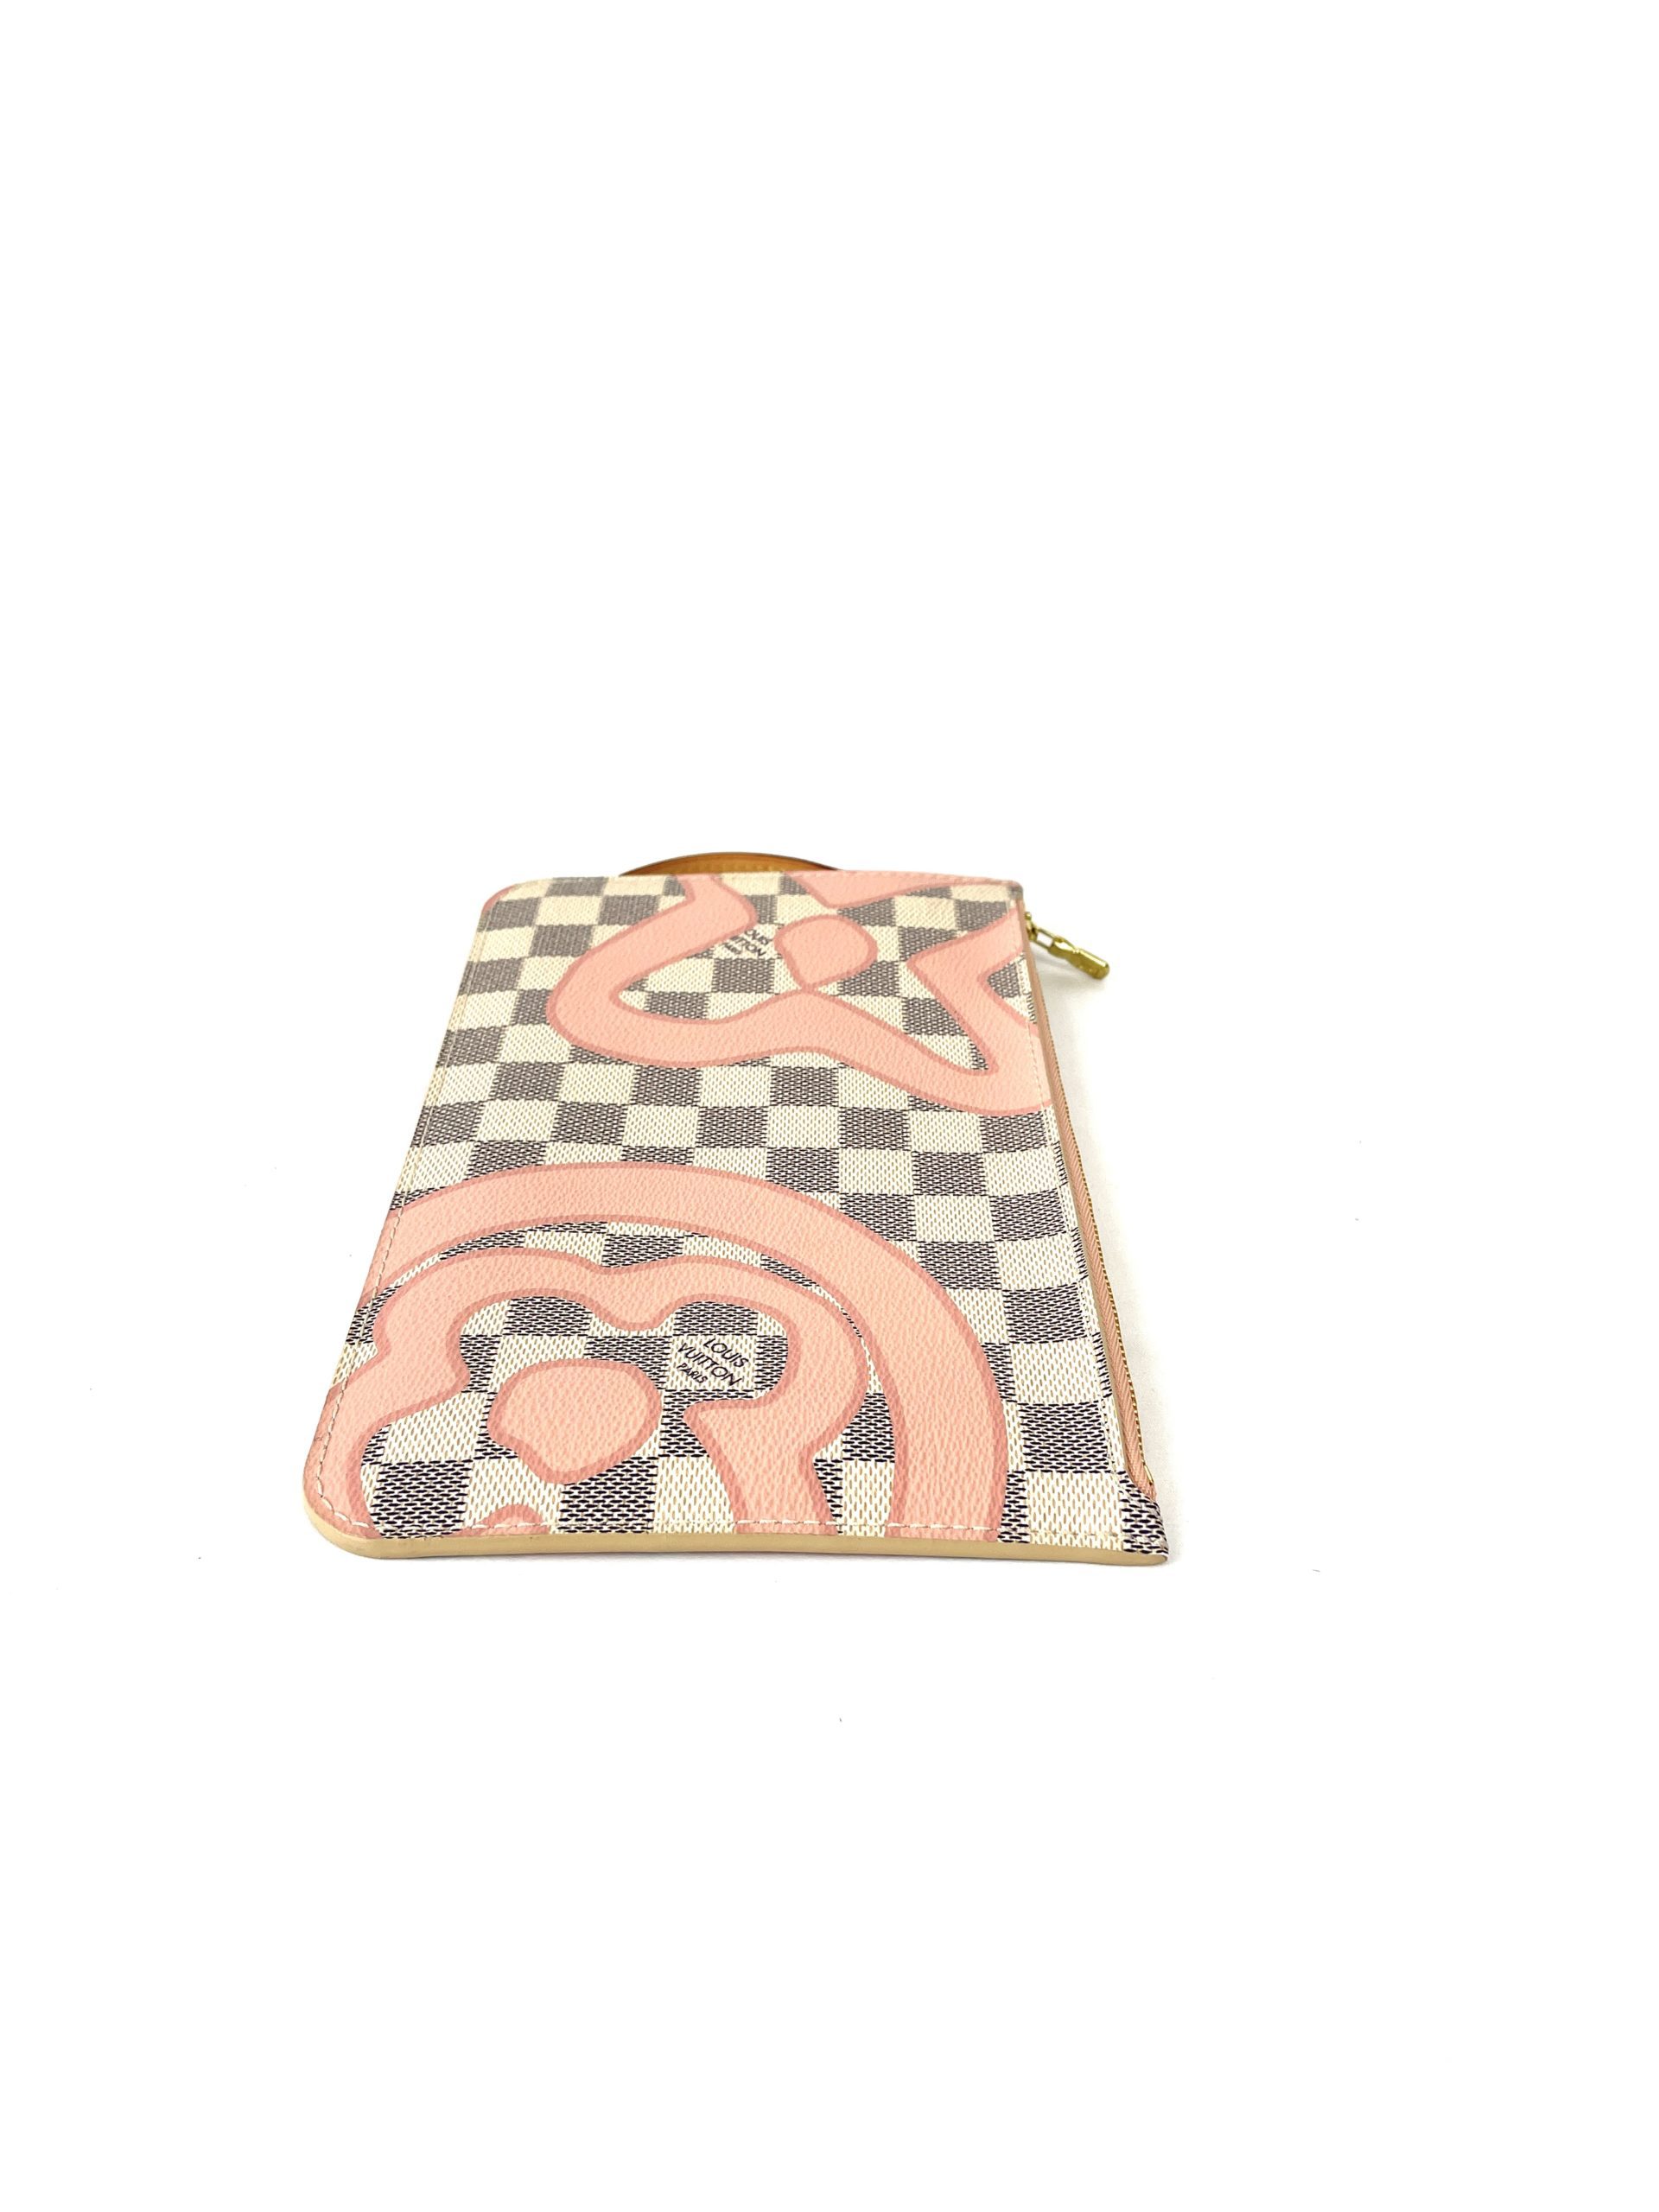 Louis Vuitton pink Rug - LIMITED EDITION